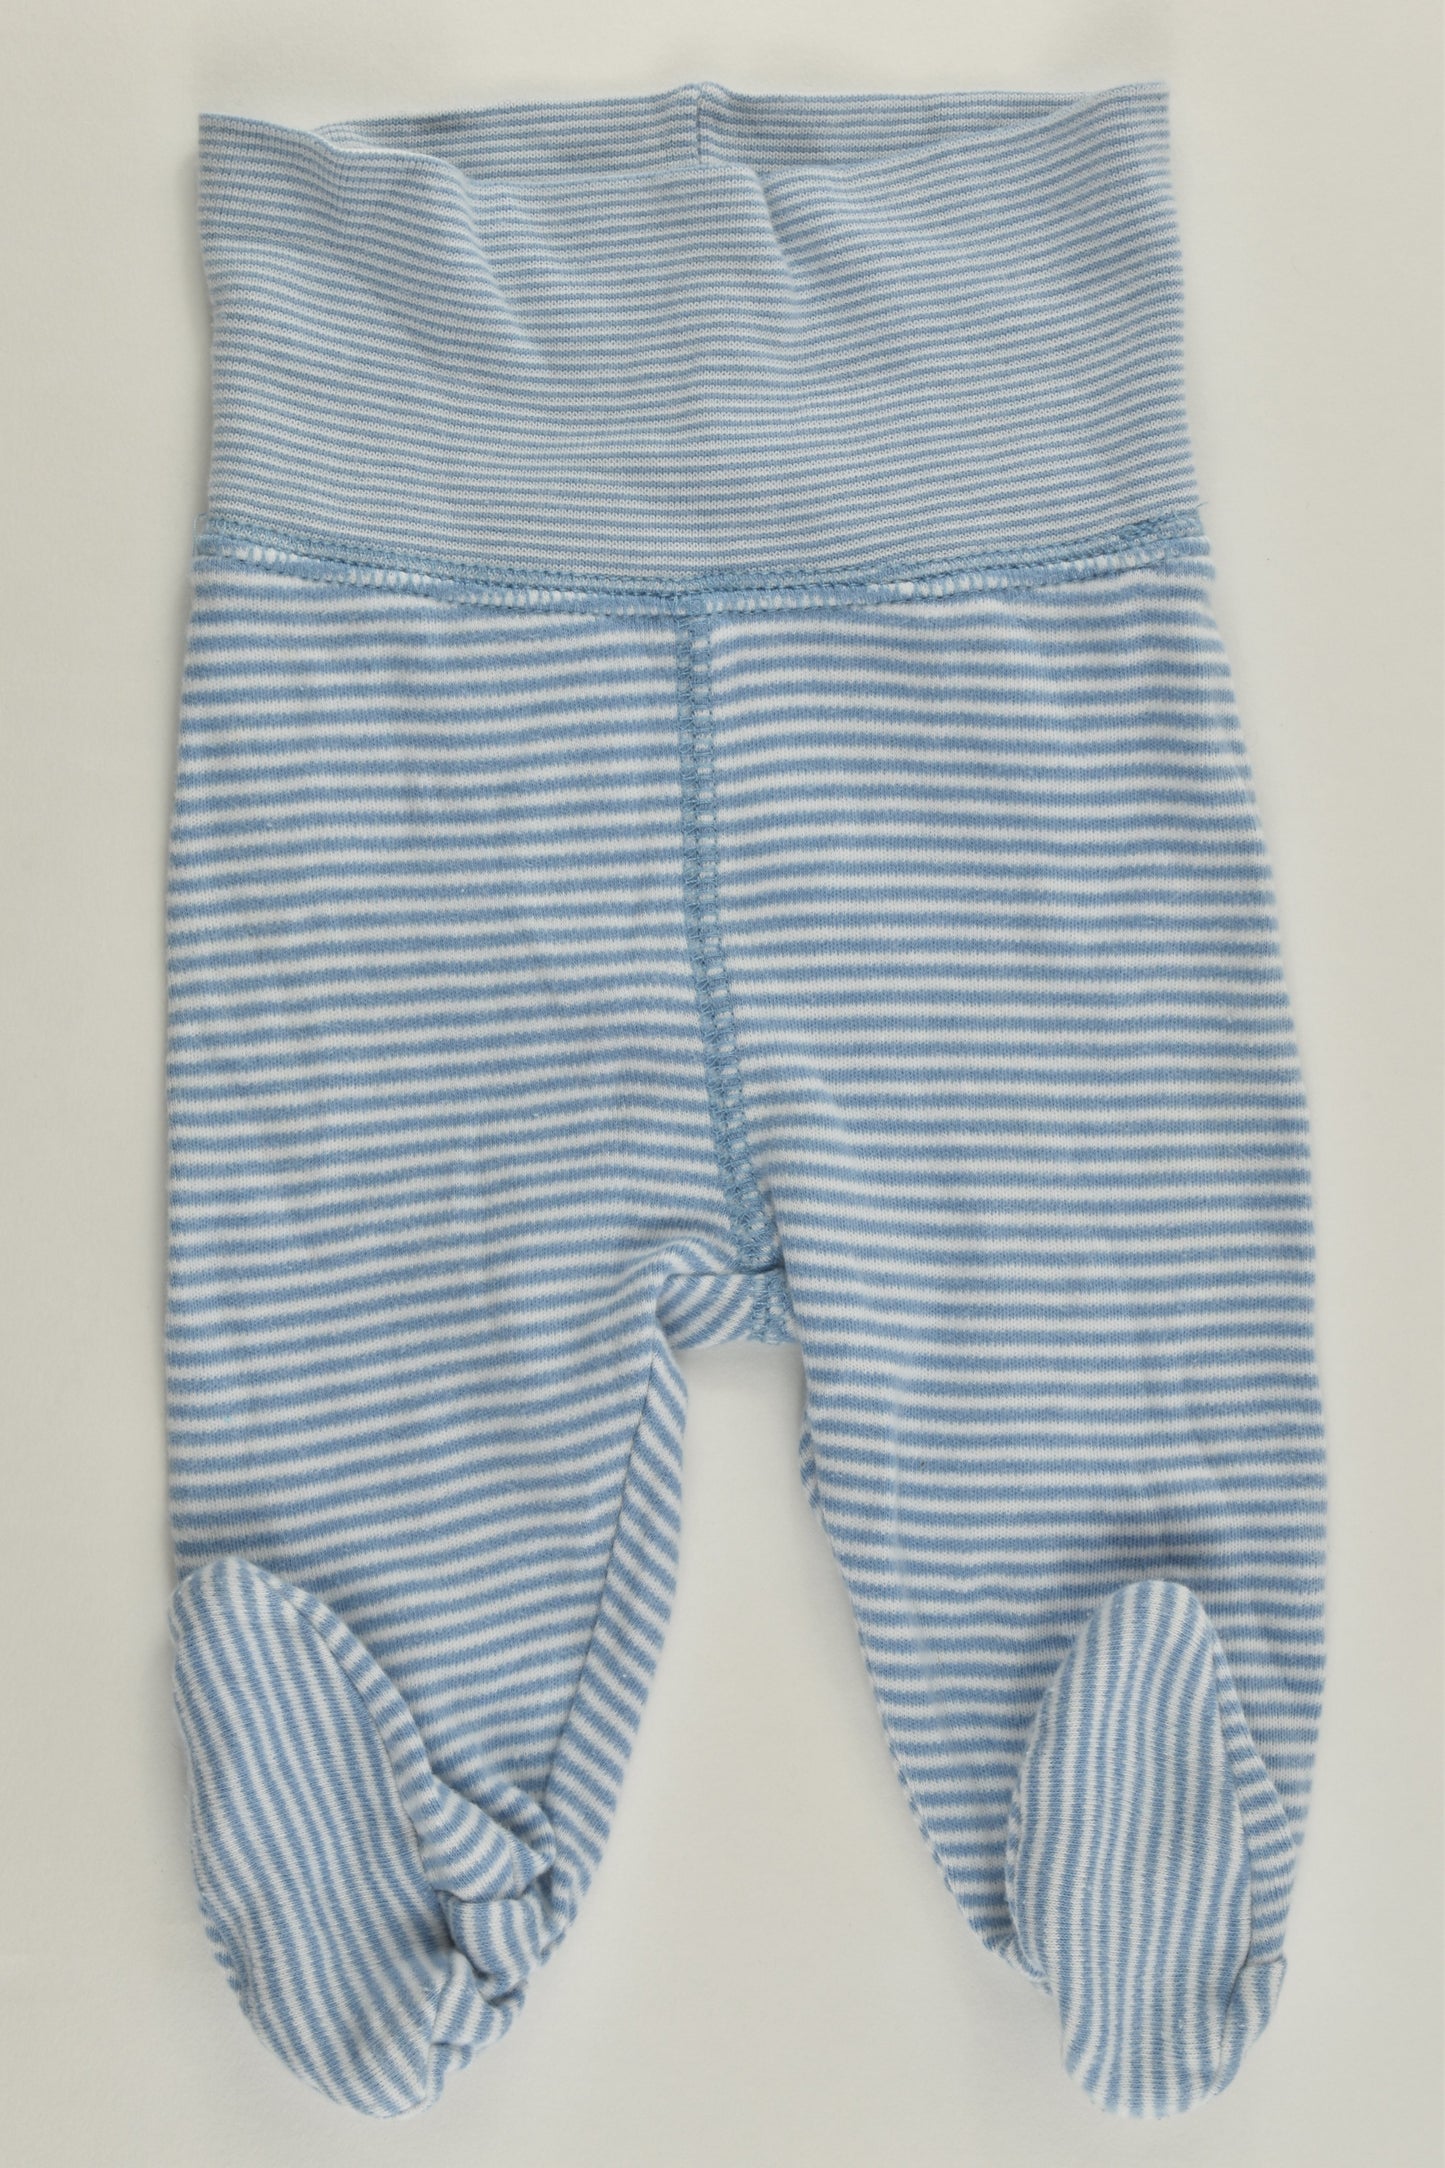 H&M Size 0000 (50 cm) Striped 'New Arrival' Footed Pants